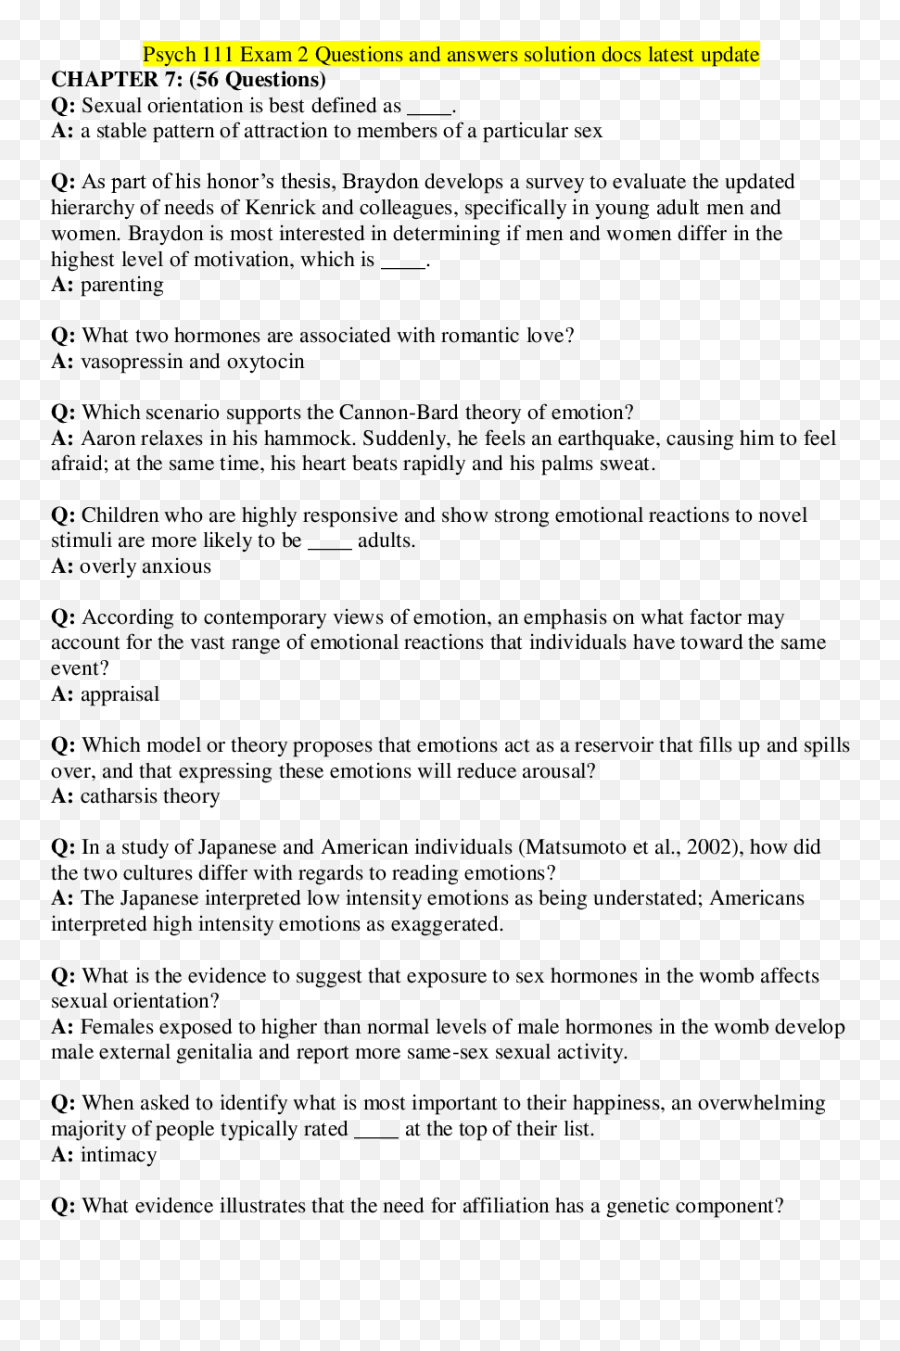 Psych 111 Exam 2 Chapter 7 - 10 Questions And Answers Solution Horizontal Emoji,James Lange Theory Of Emotion